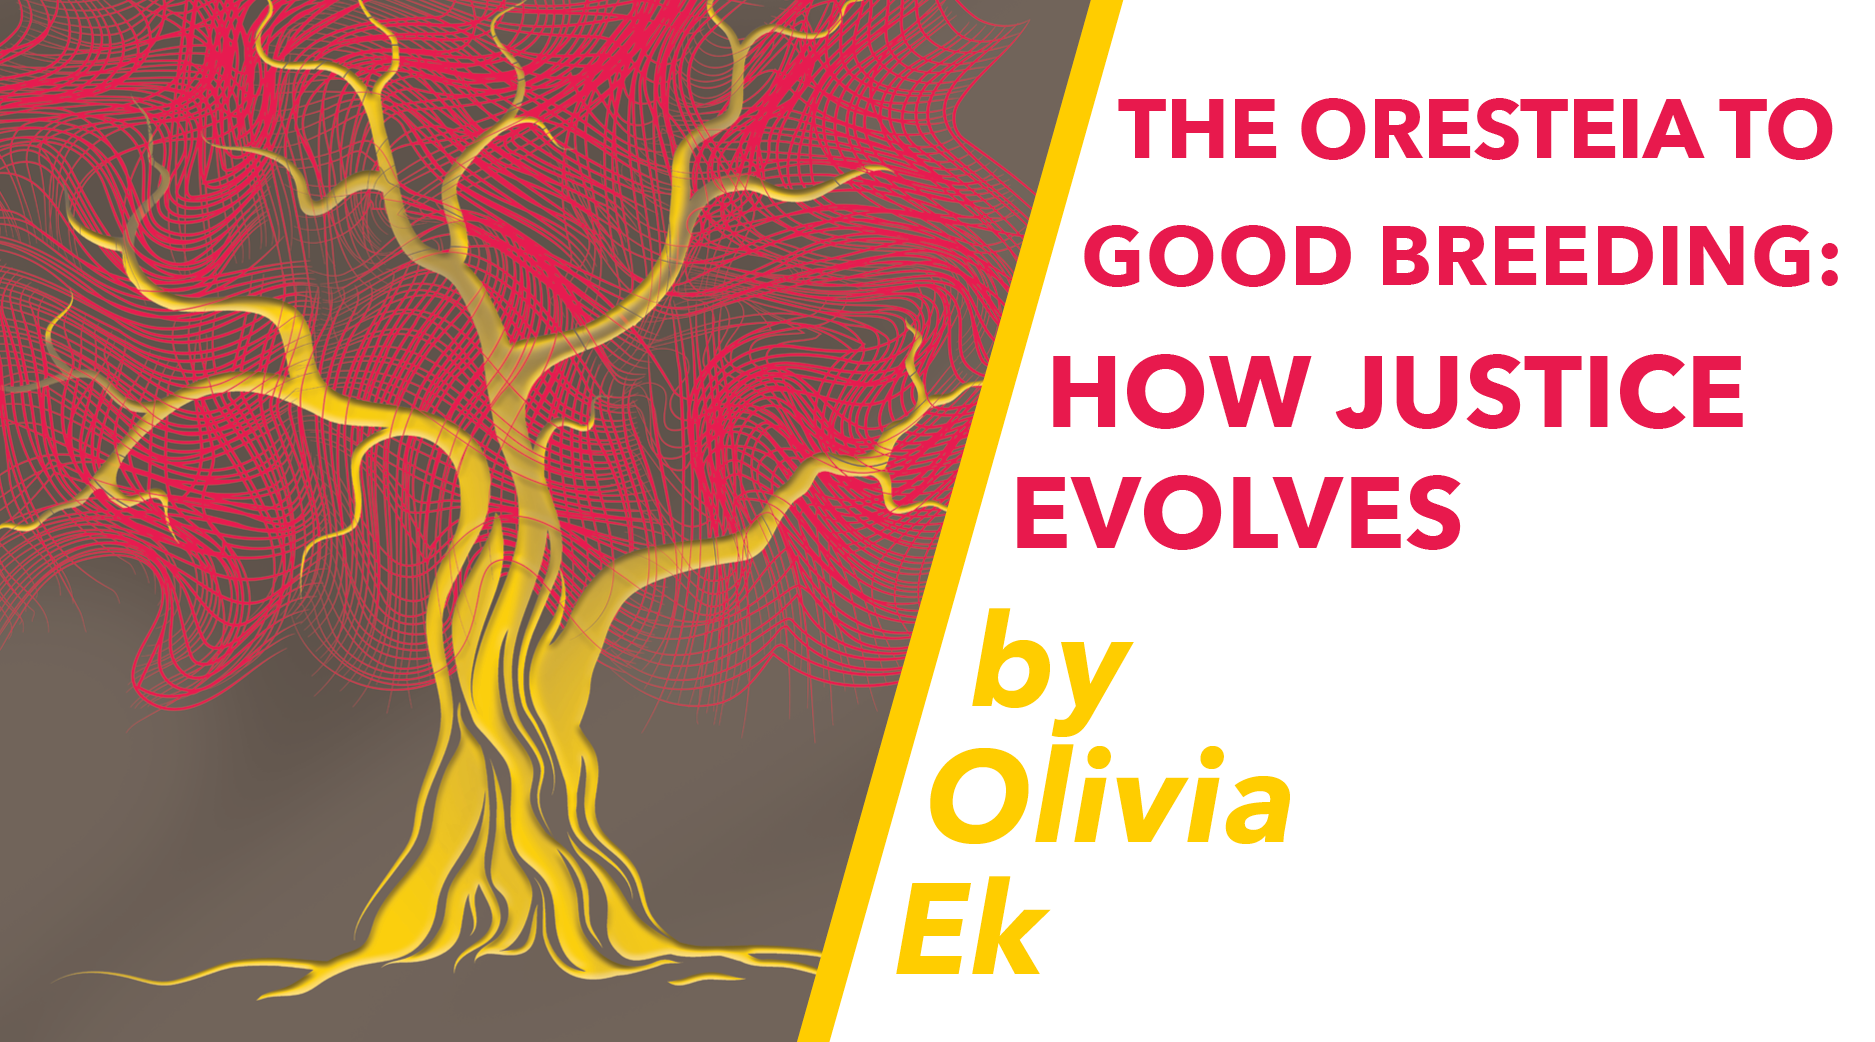 The Oresteia to Good Breeding: How Justice Evolves